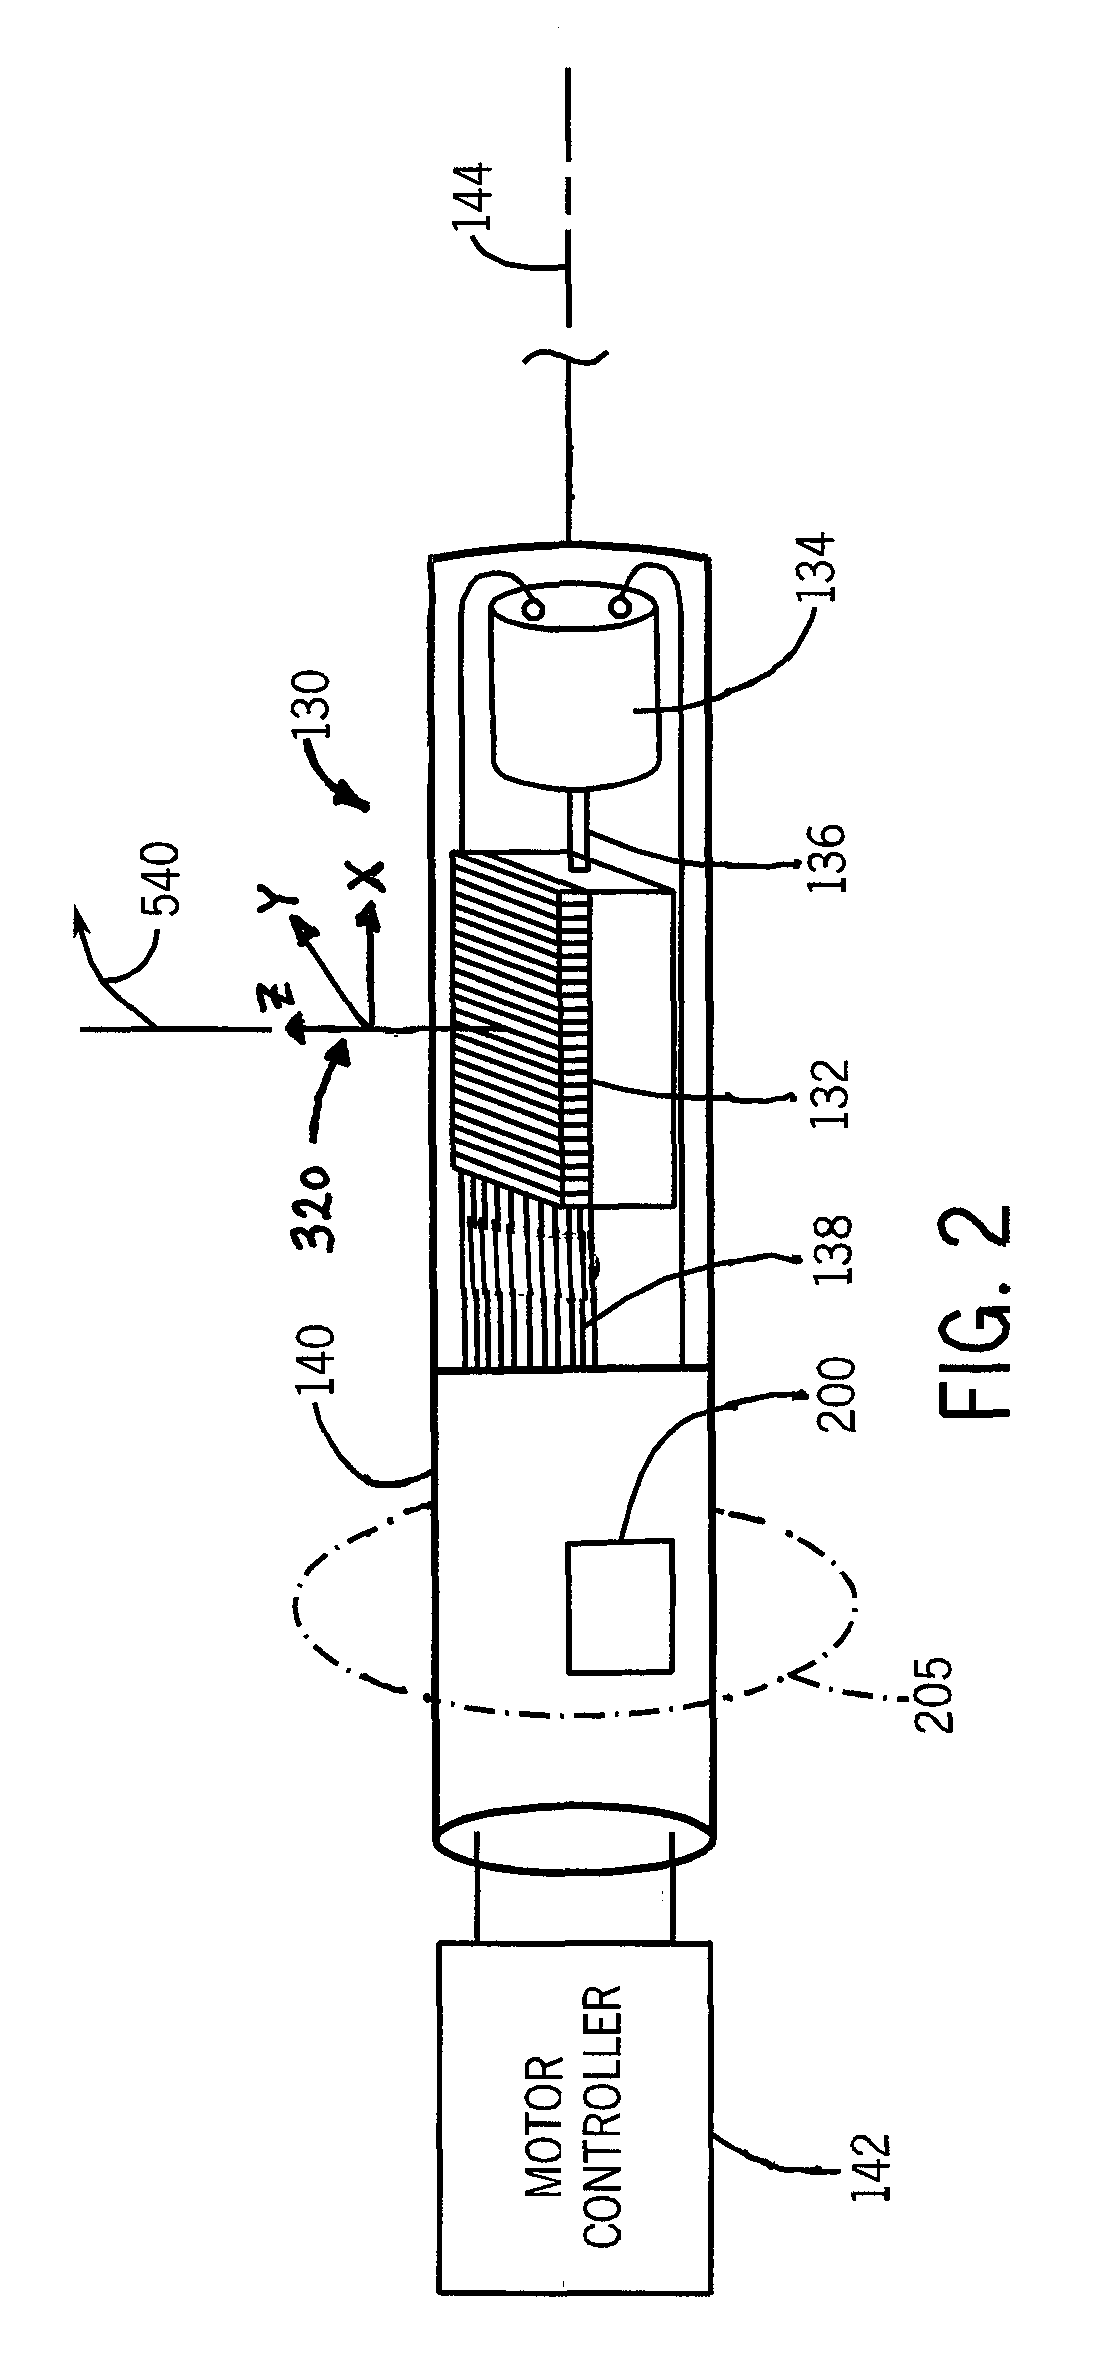 System and method to register a tracking system with intracardiac echocardiography (ICE) imaging system